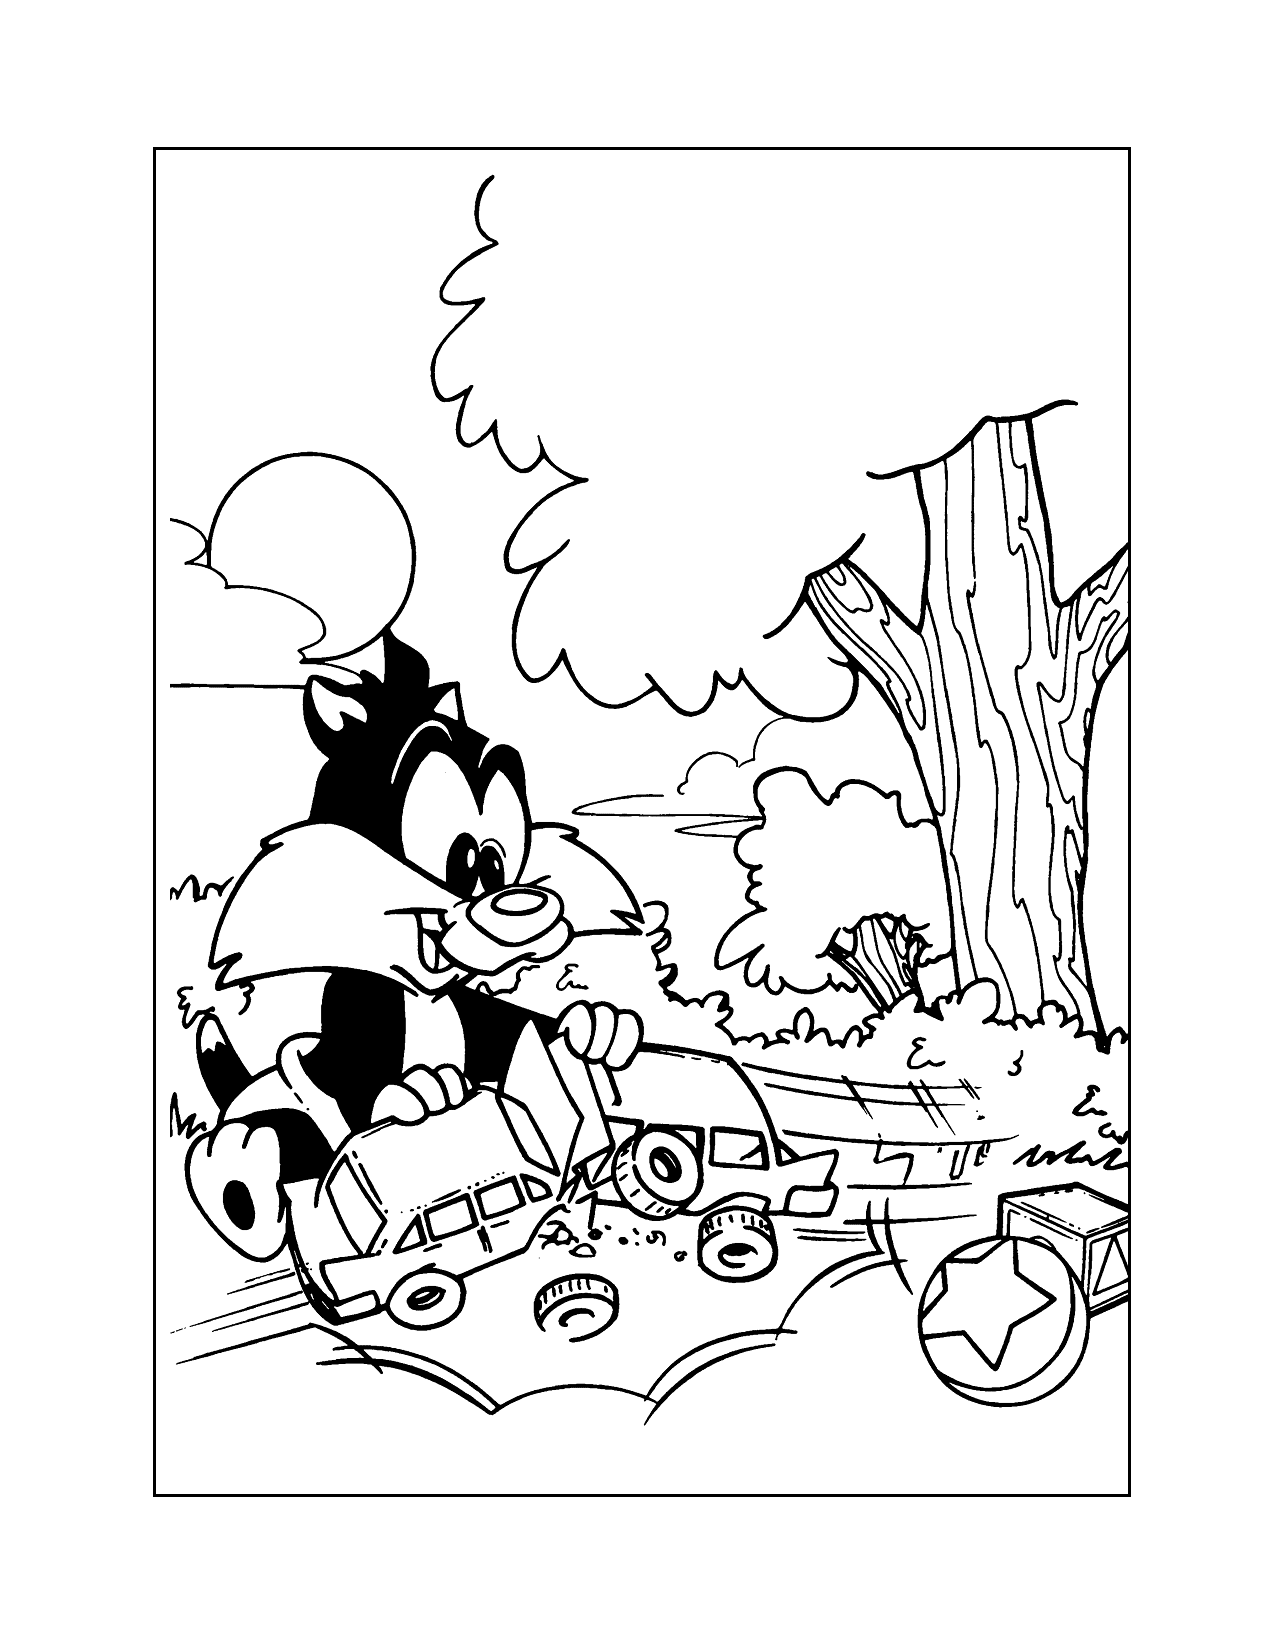 Baby Sylvester Playing Car Crash Coloring Page